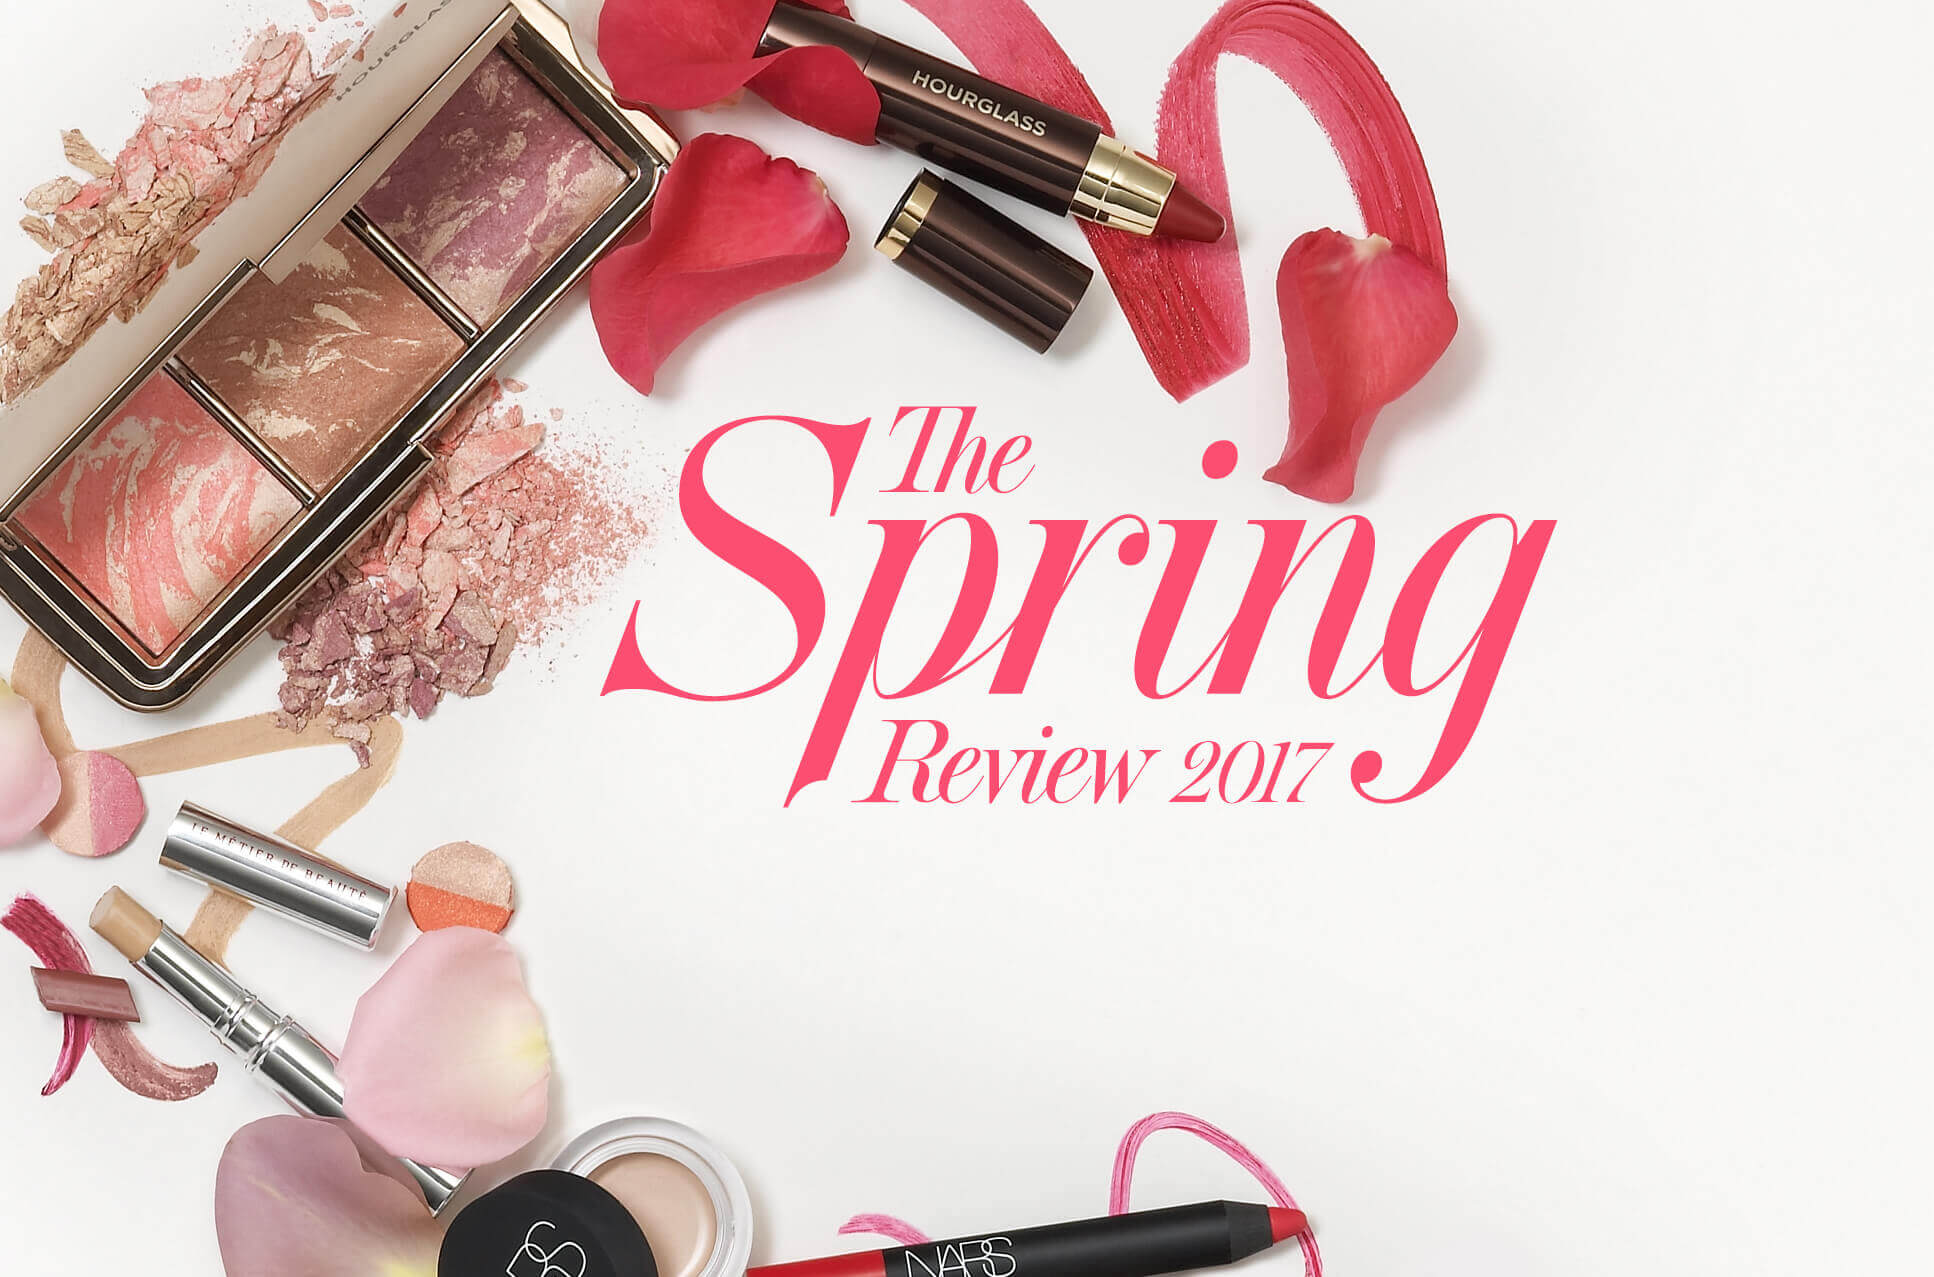 The Spring Review 2017